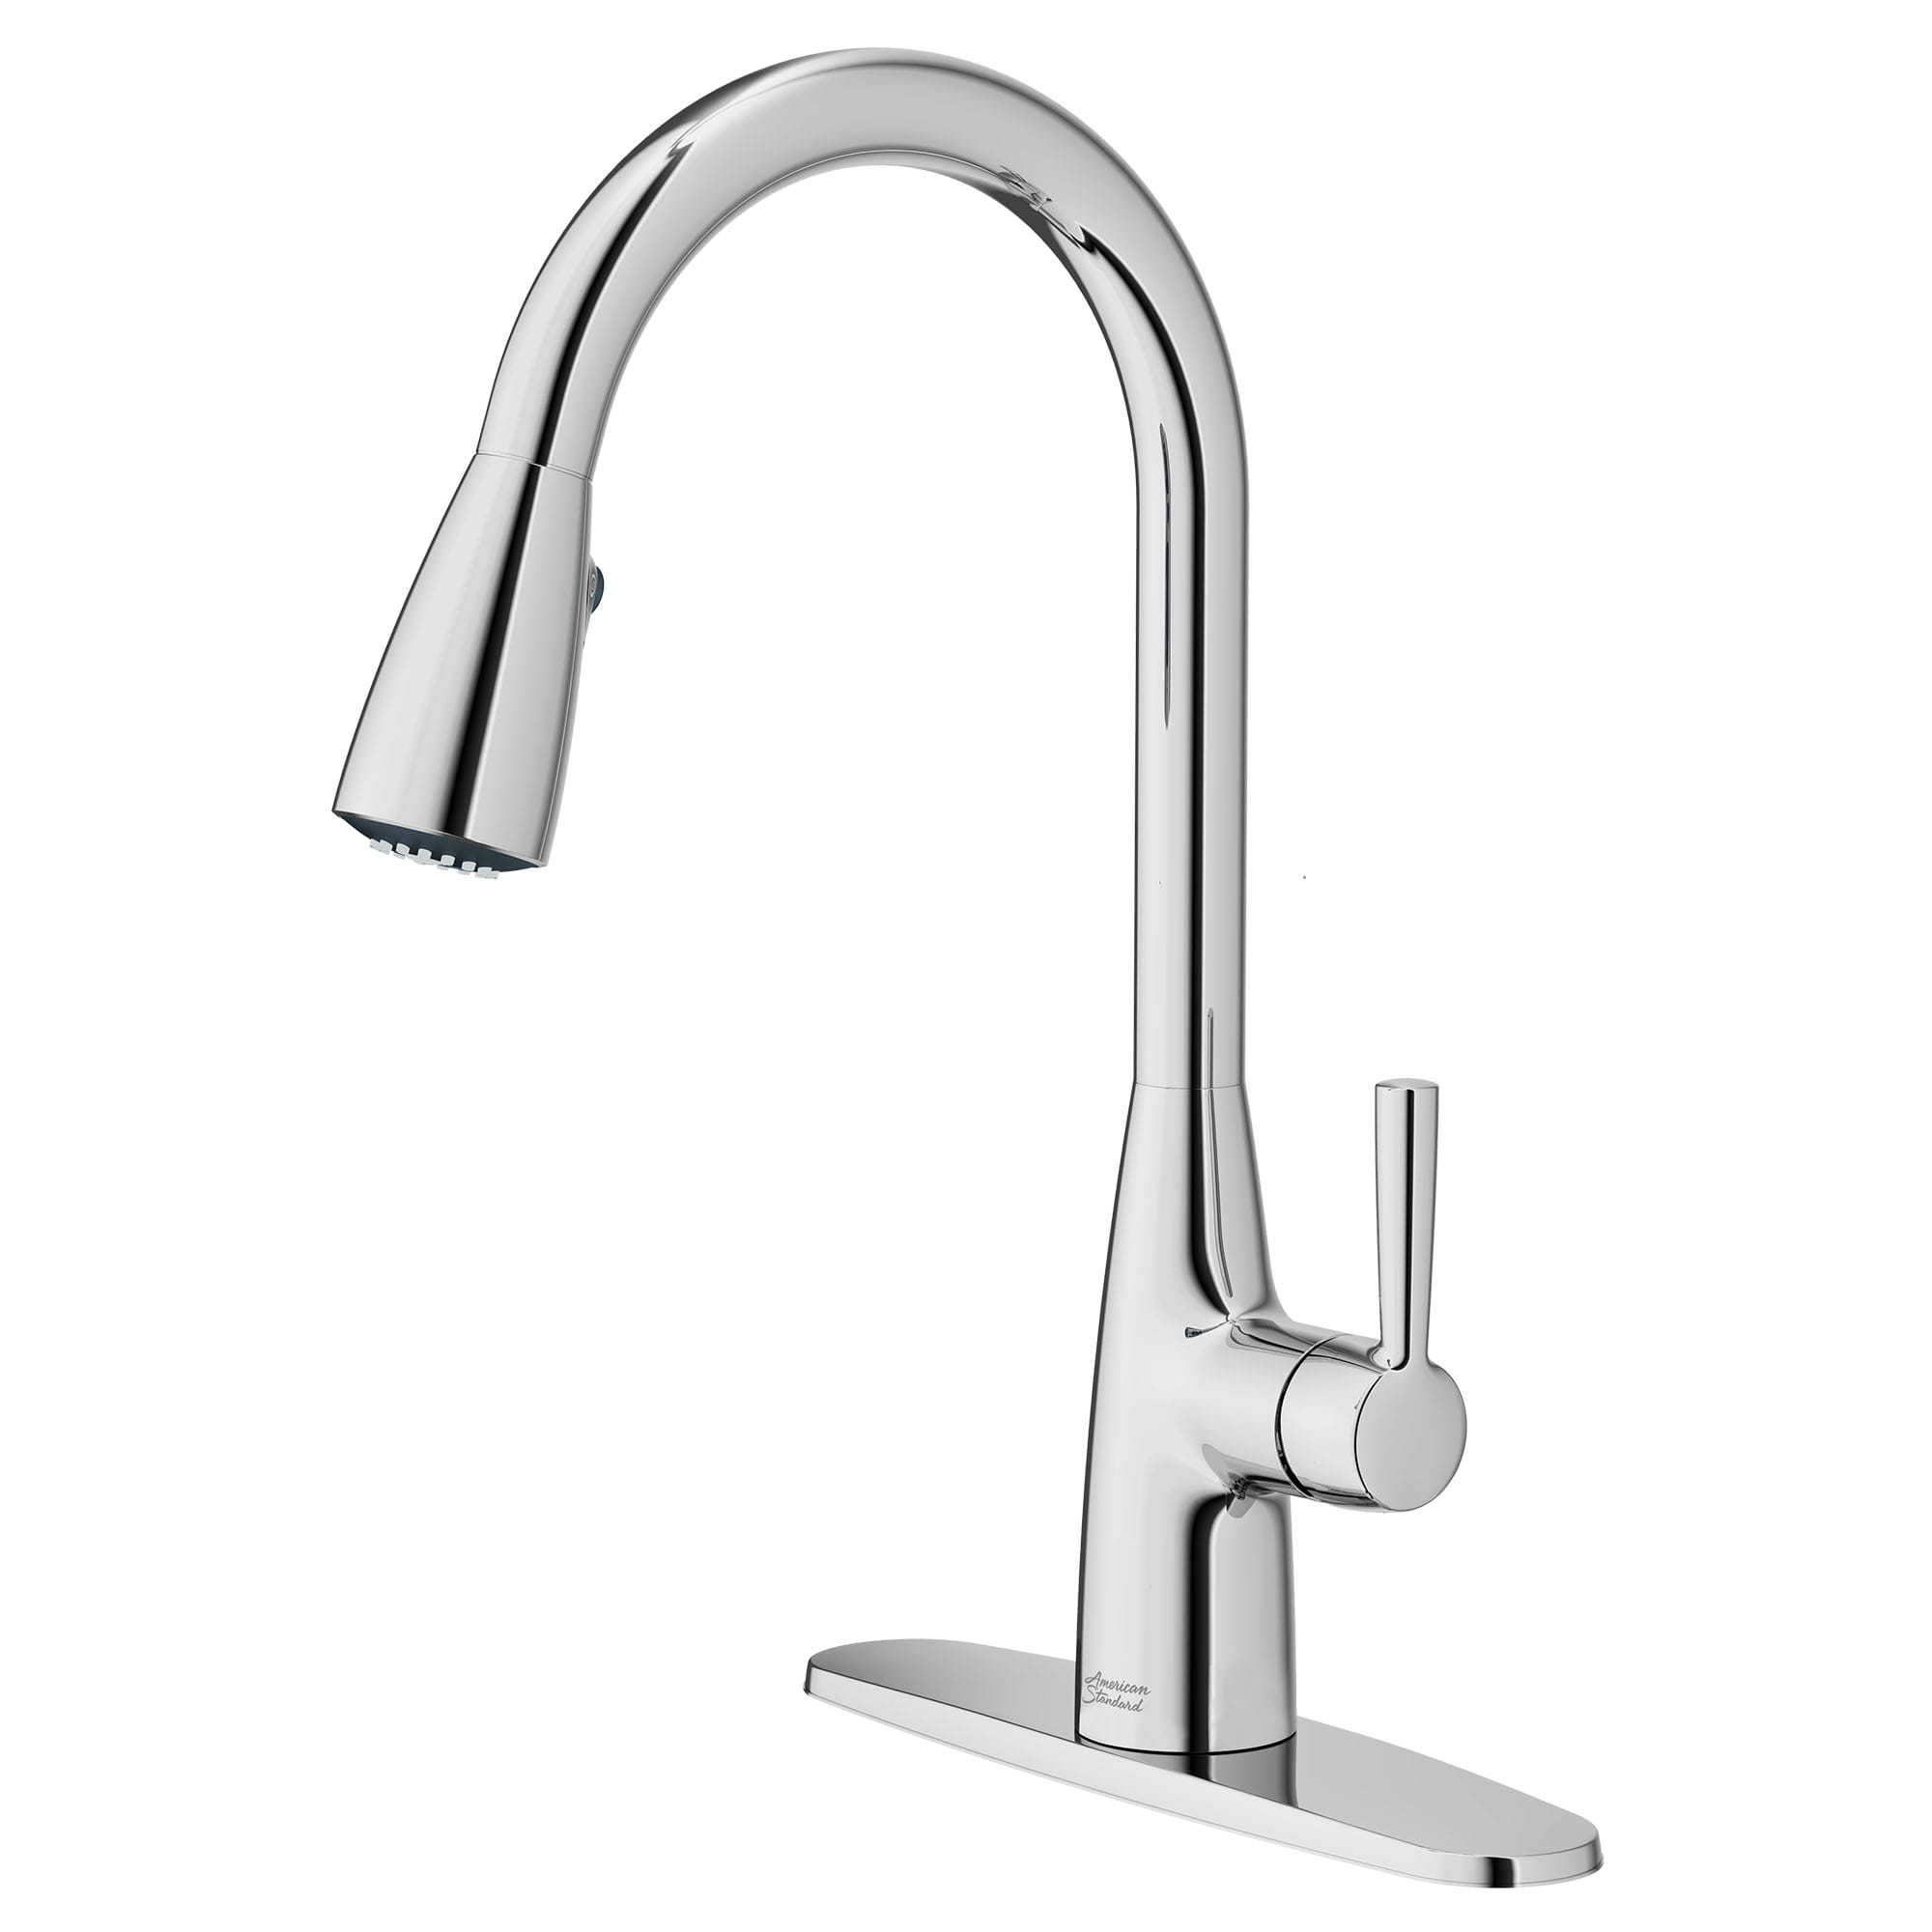 American Standard Fairbury 1-Handle Pull-Down Sprayer Faucet in Polished Chrome 